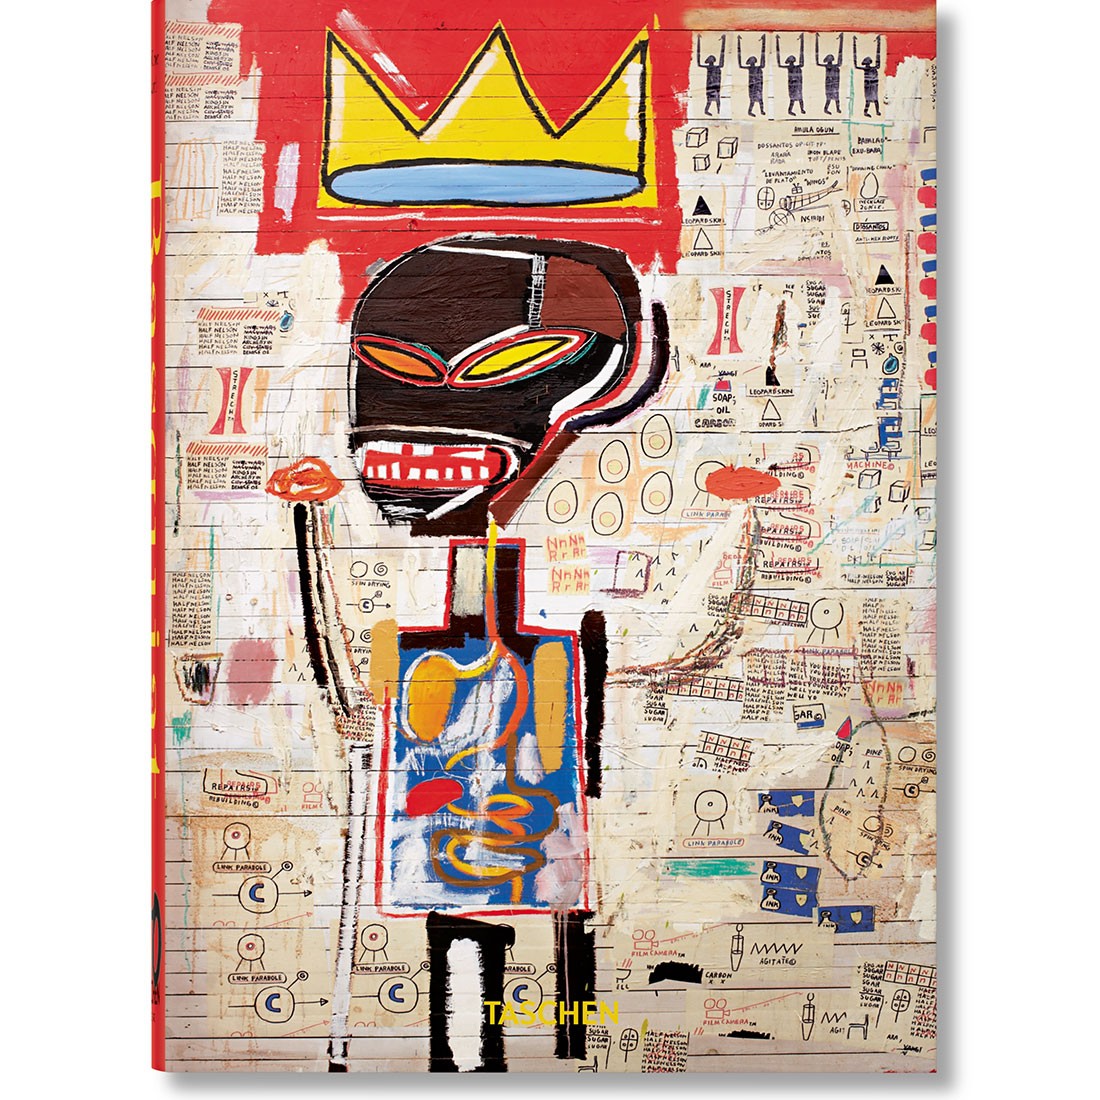 Basquiat - 40th Anniversary Hardcover Book (brown / hardcover)